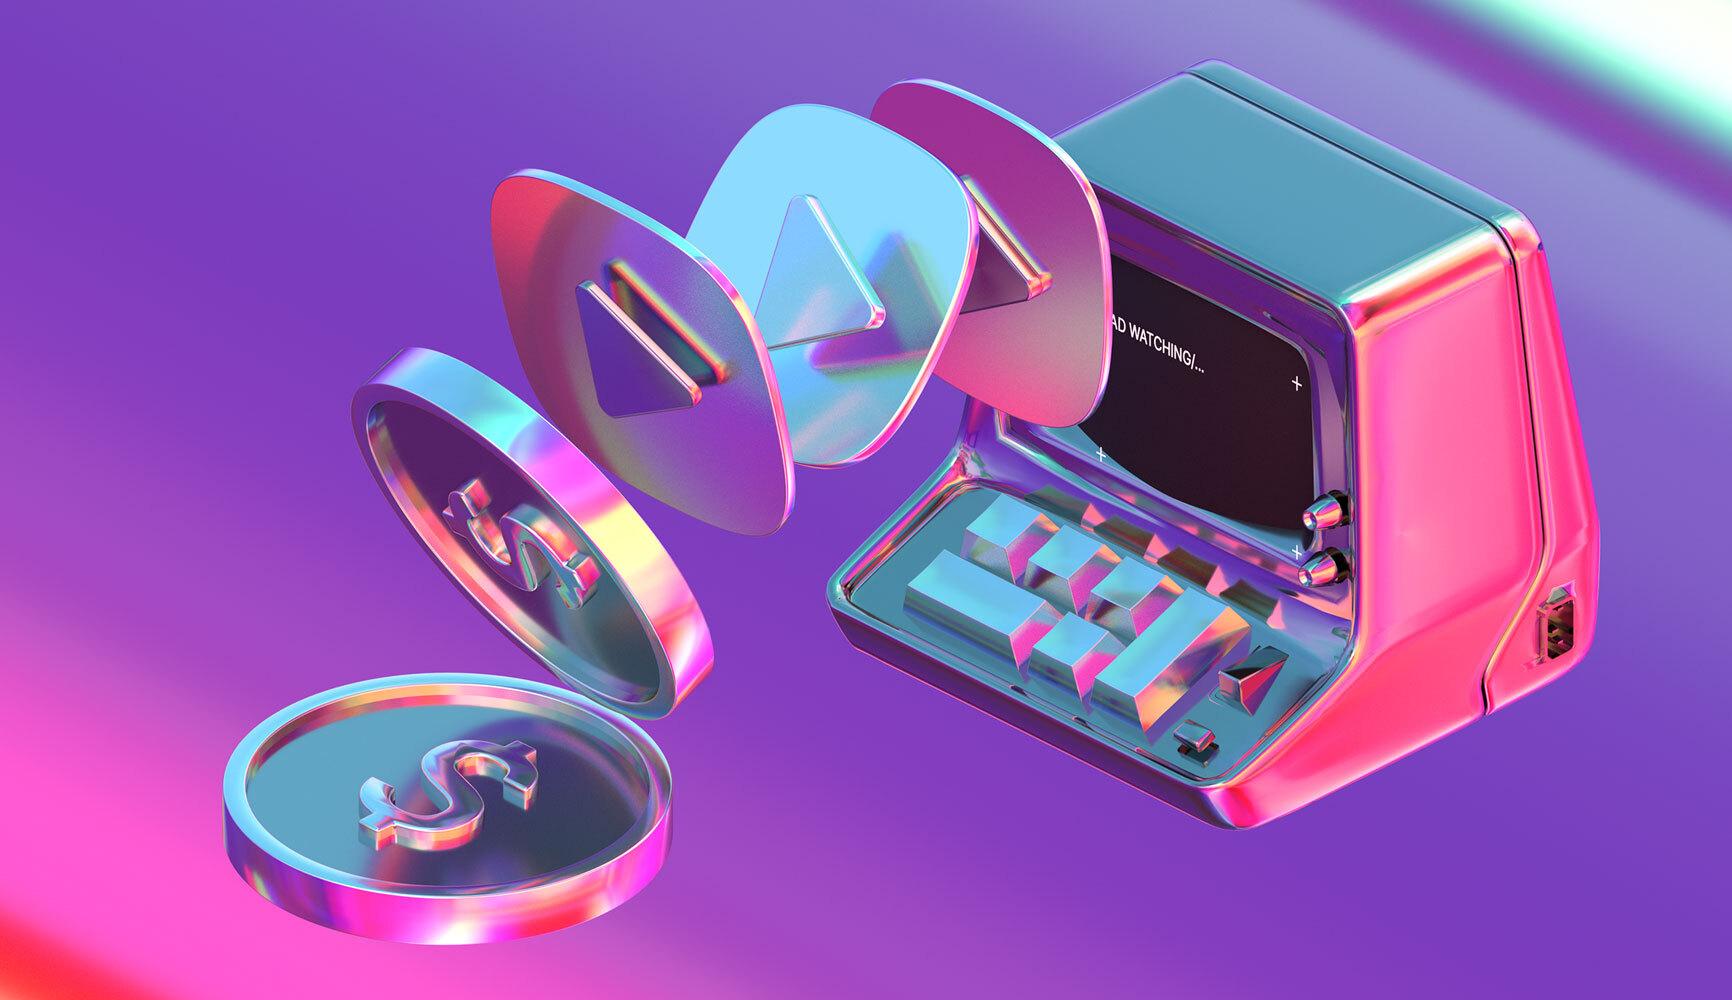 A futuristic 3D illustration showing how to watch ads for money with a retro-style computer, floating keyboard, and metallic symbols including a dollar sign and play buttons, set against a vibrant purple and pink gradient background.